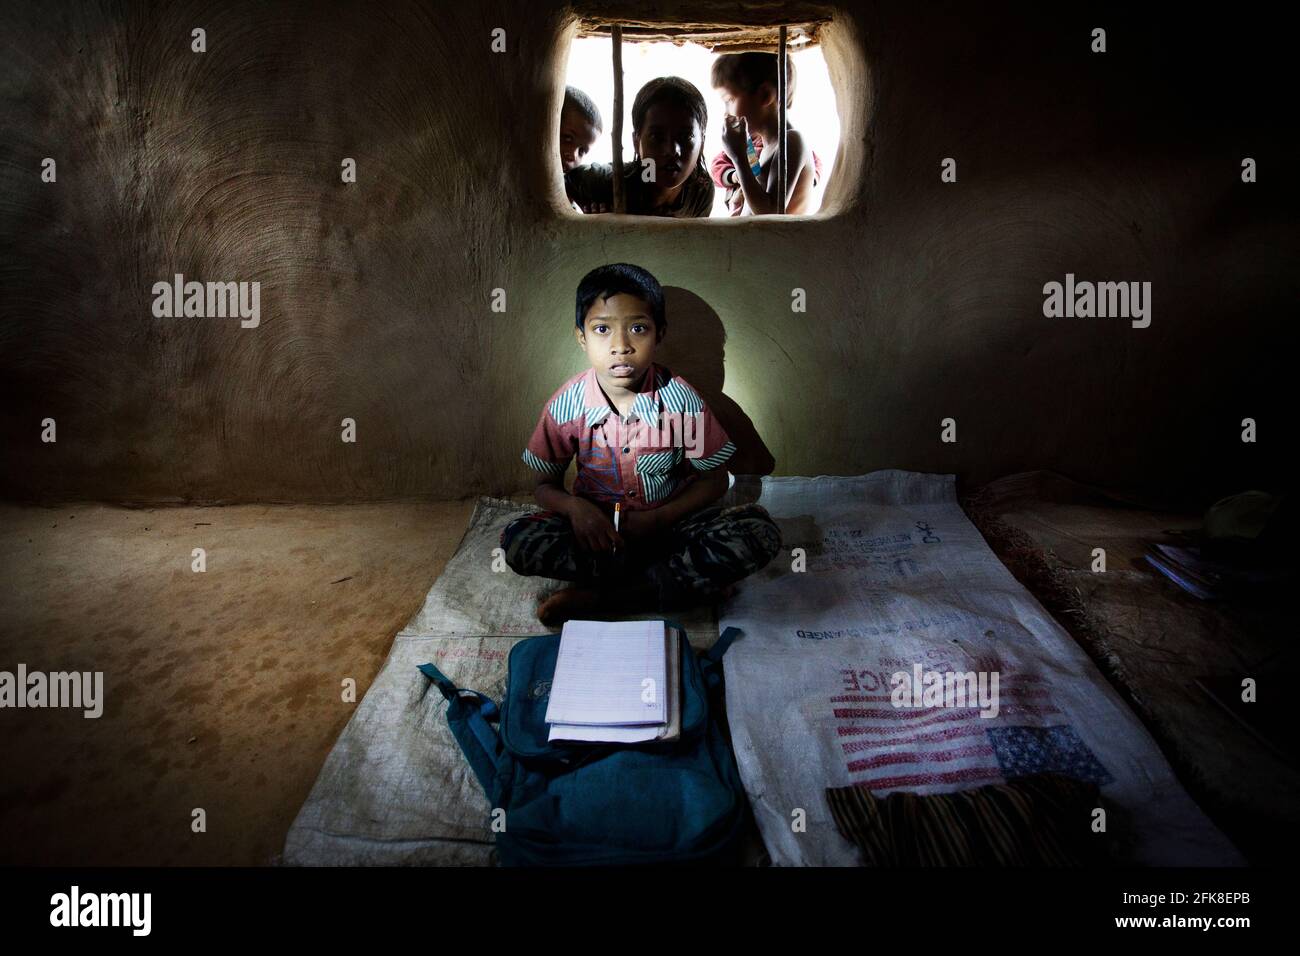 Young Rohingya refugee inside a little school made of mad in Kutupalong refugee camp, Bangladesh border Myanmar Stock Photo